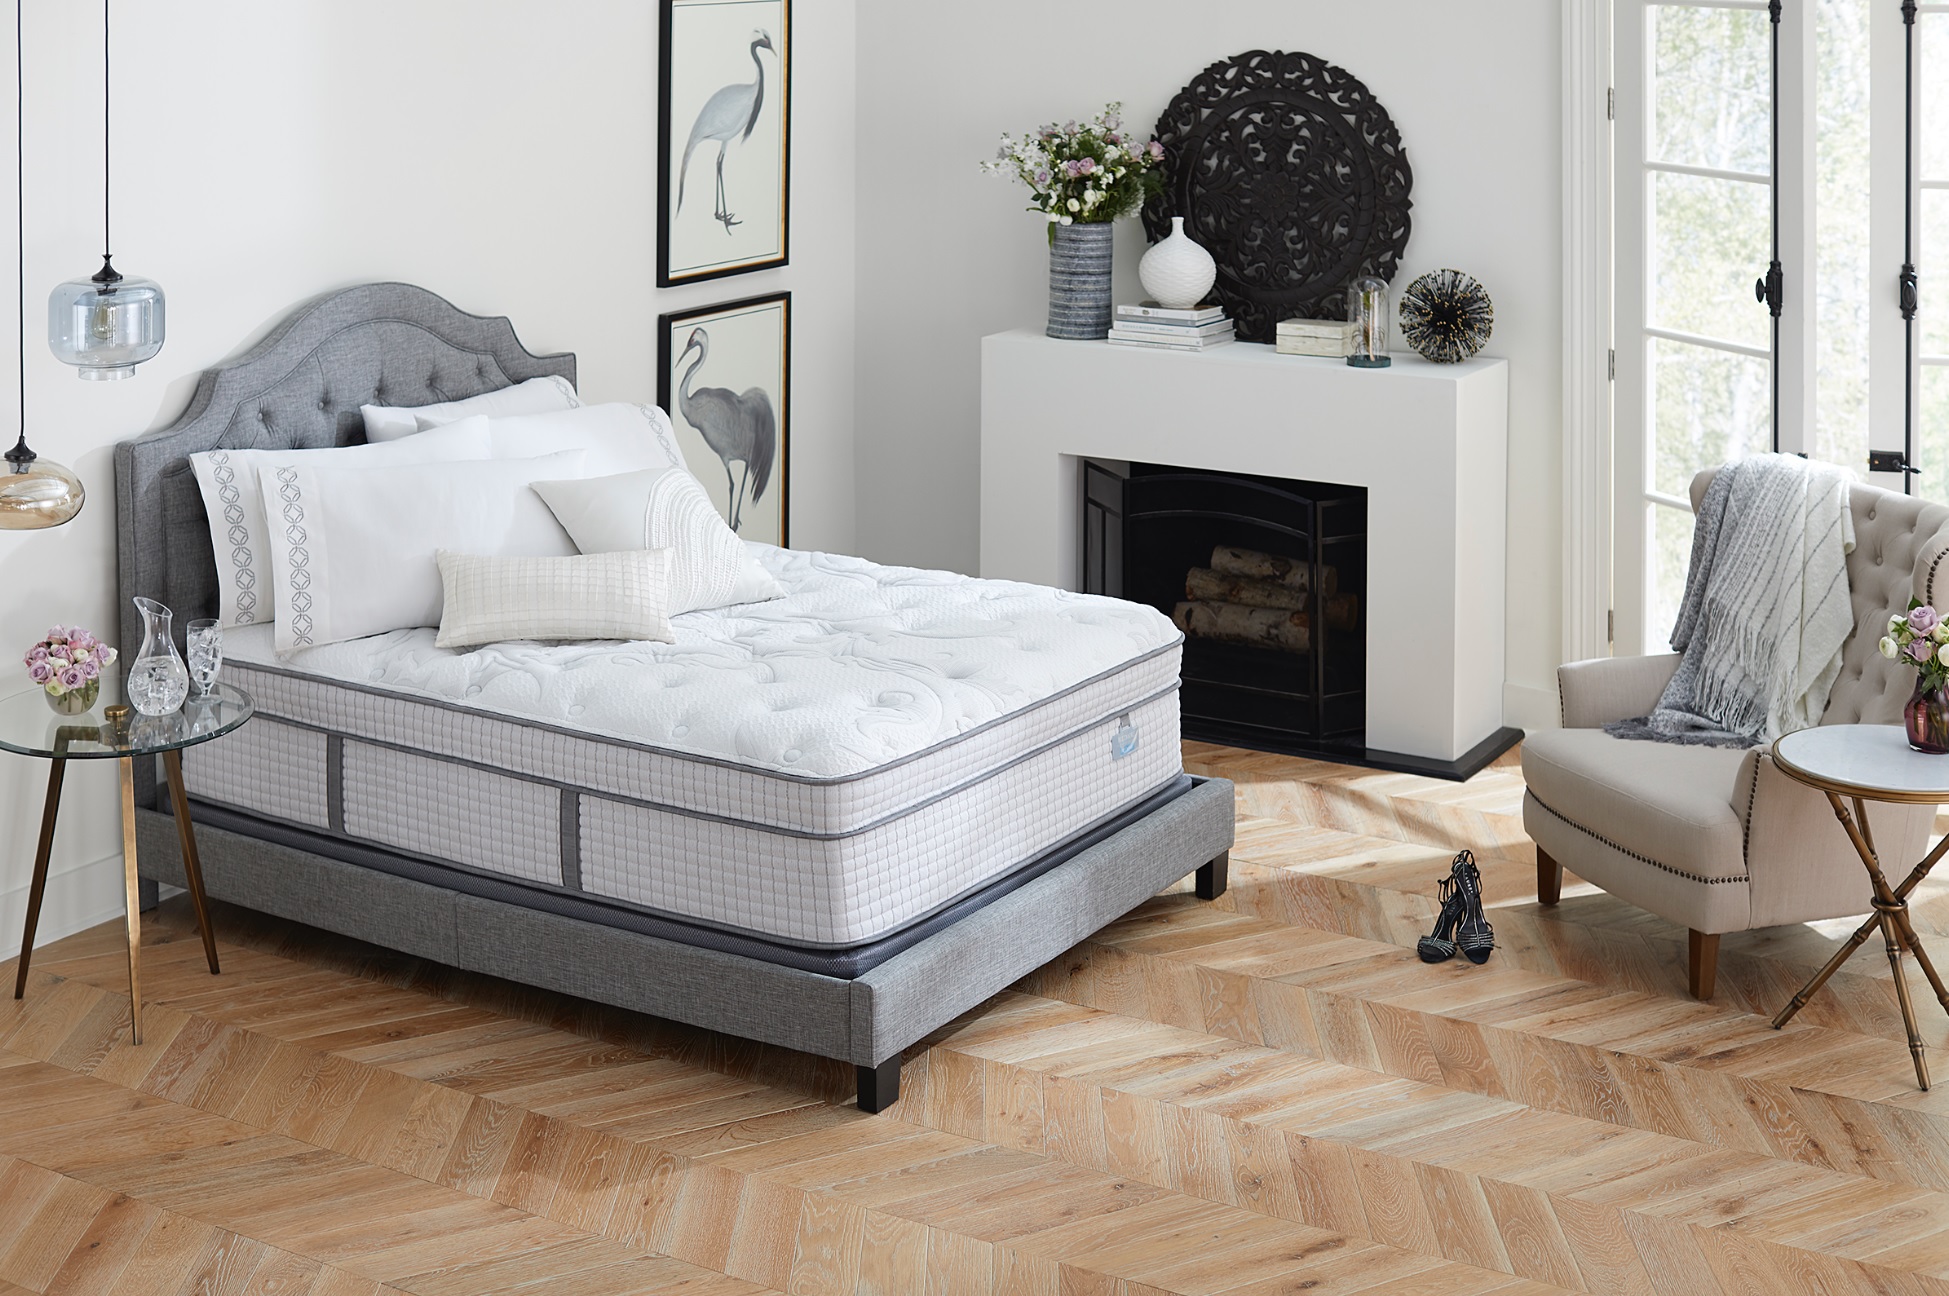 Mattress Size Guide: Everything You Need to Know About Mattress Sizes -  Restonic